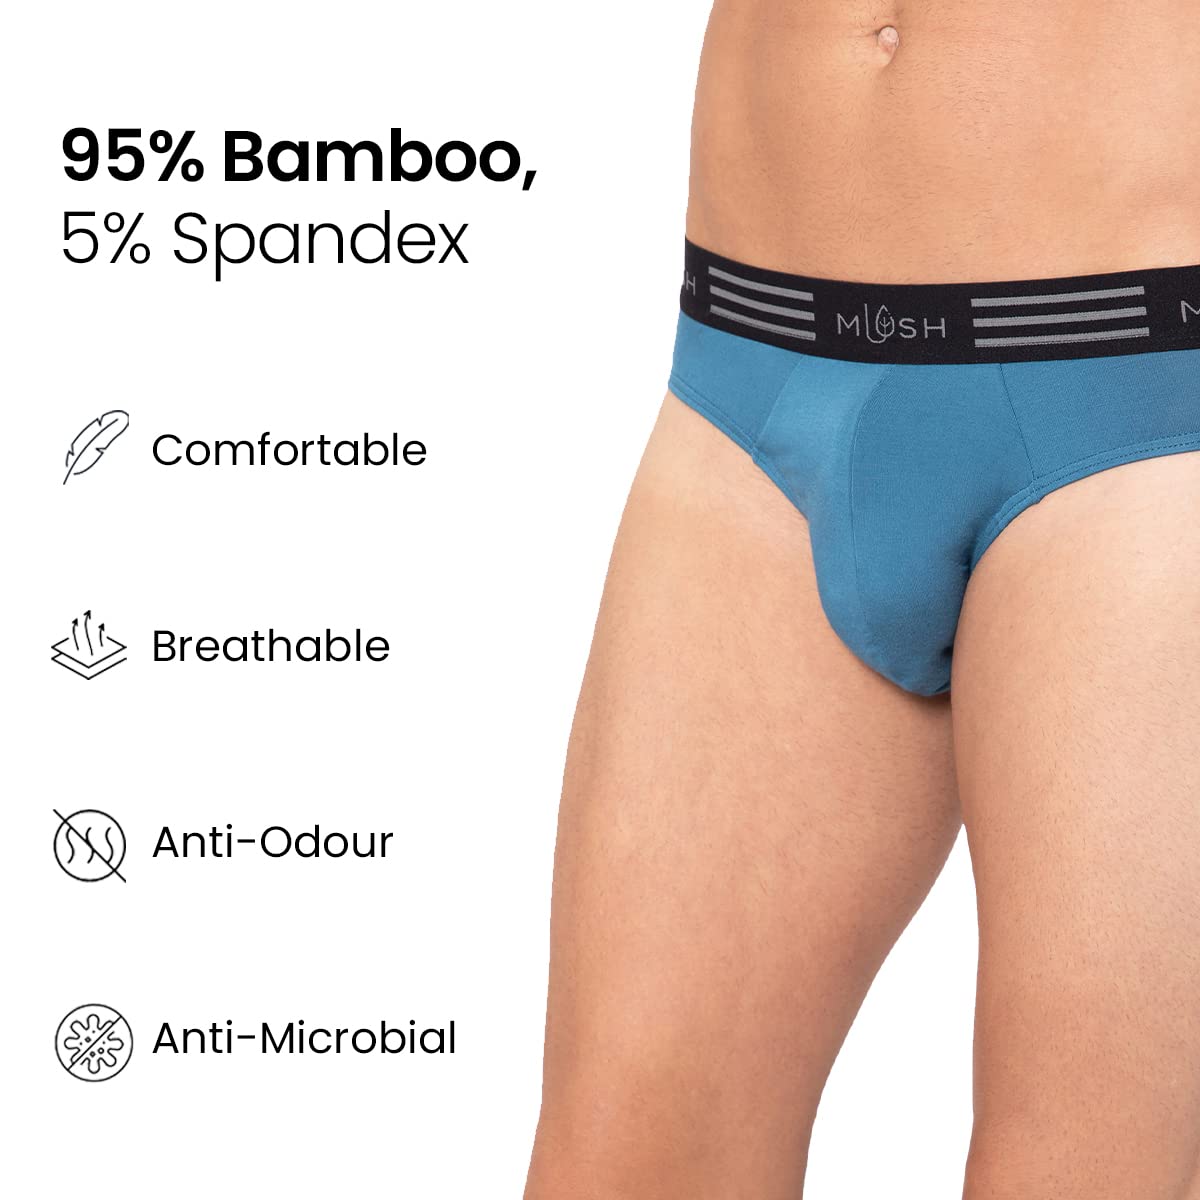 Mush Ultra Soft, Breathable, Feather Light Men's Bamboo Brief || Naturally Anti-Odor and Anti-Microbial Bamboo Innerwear (Pack of 3)